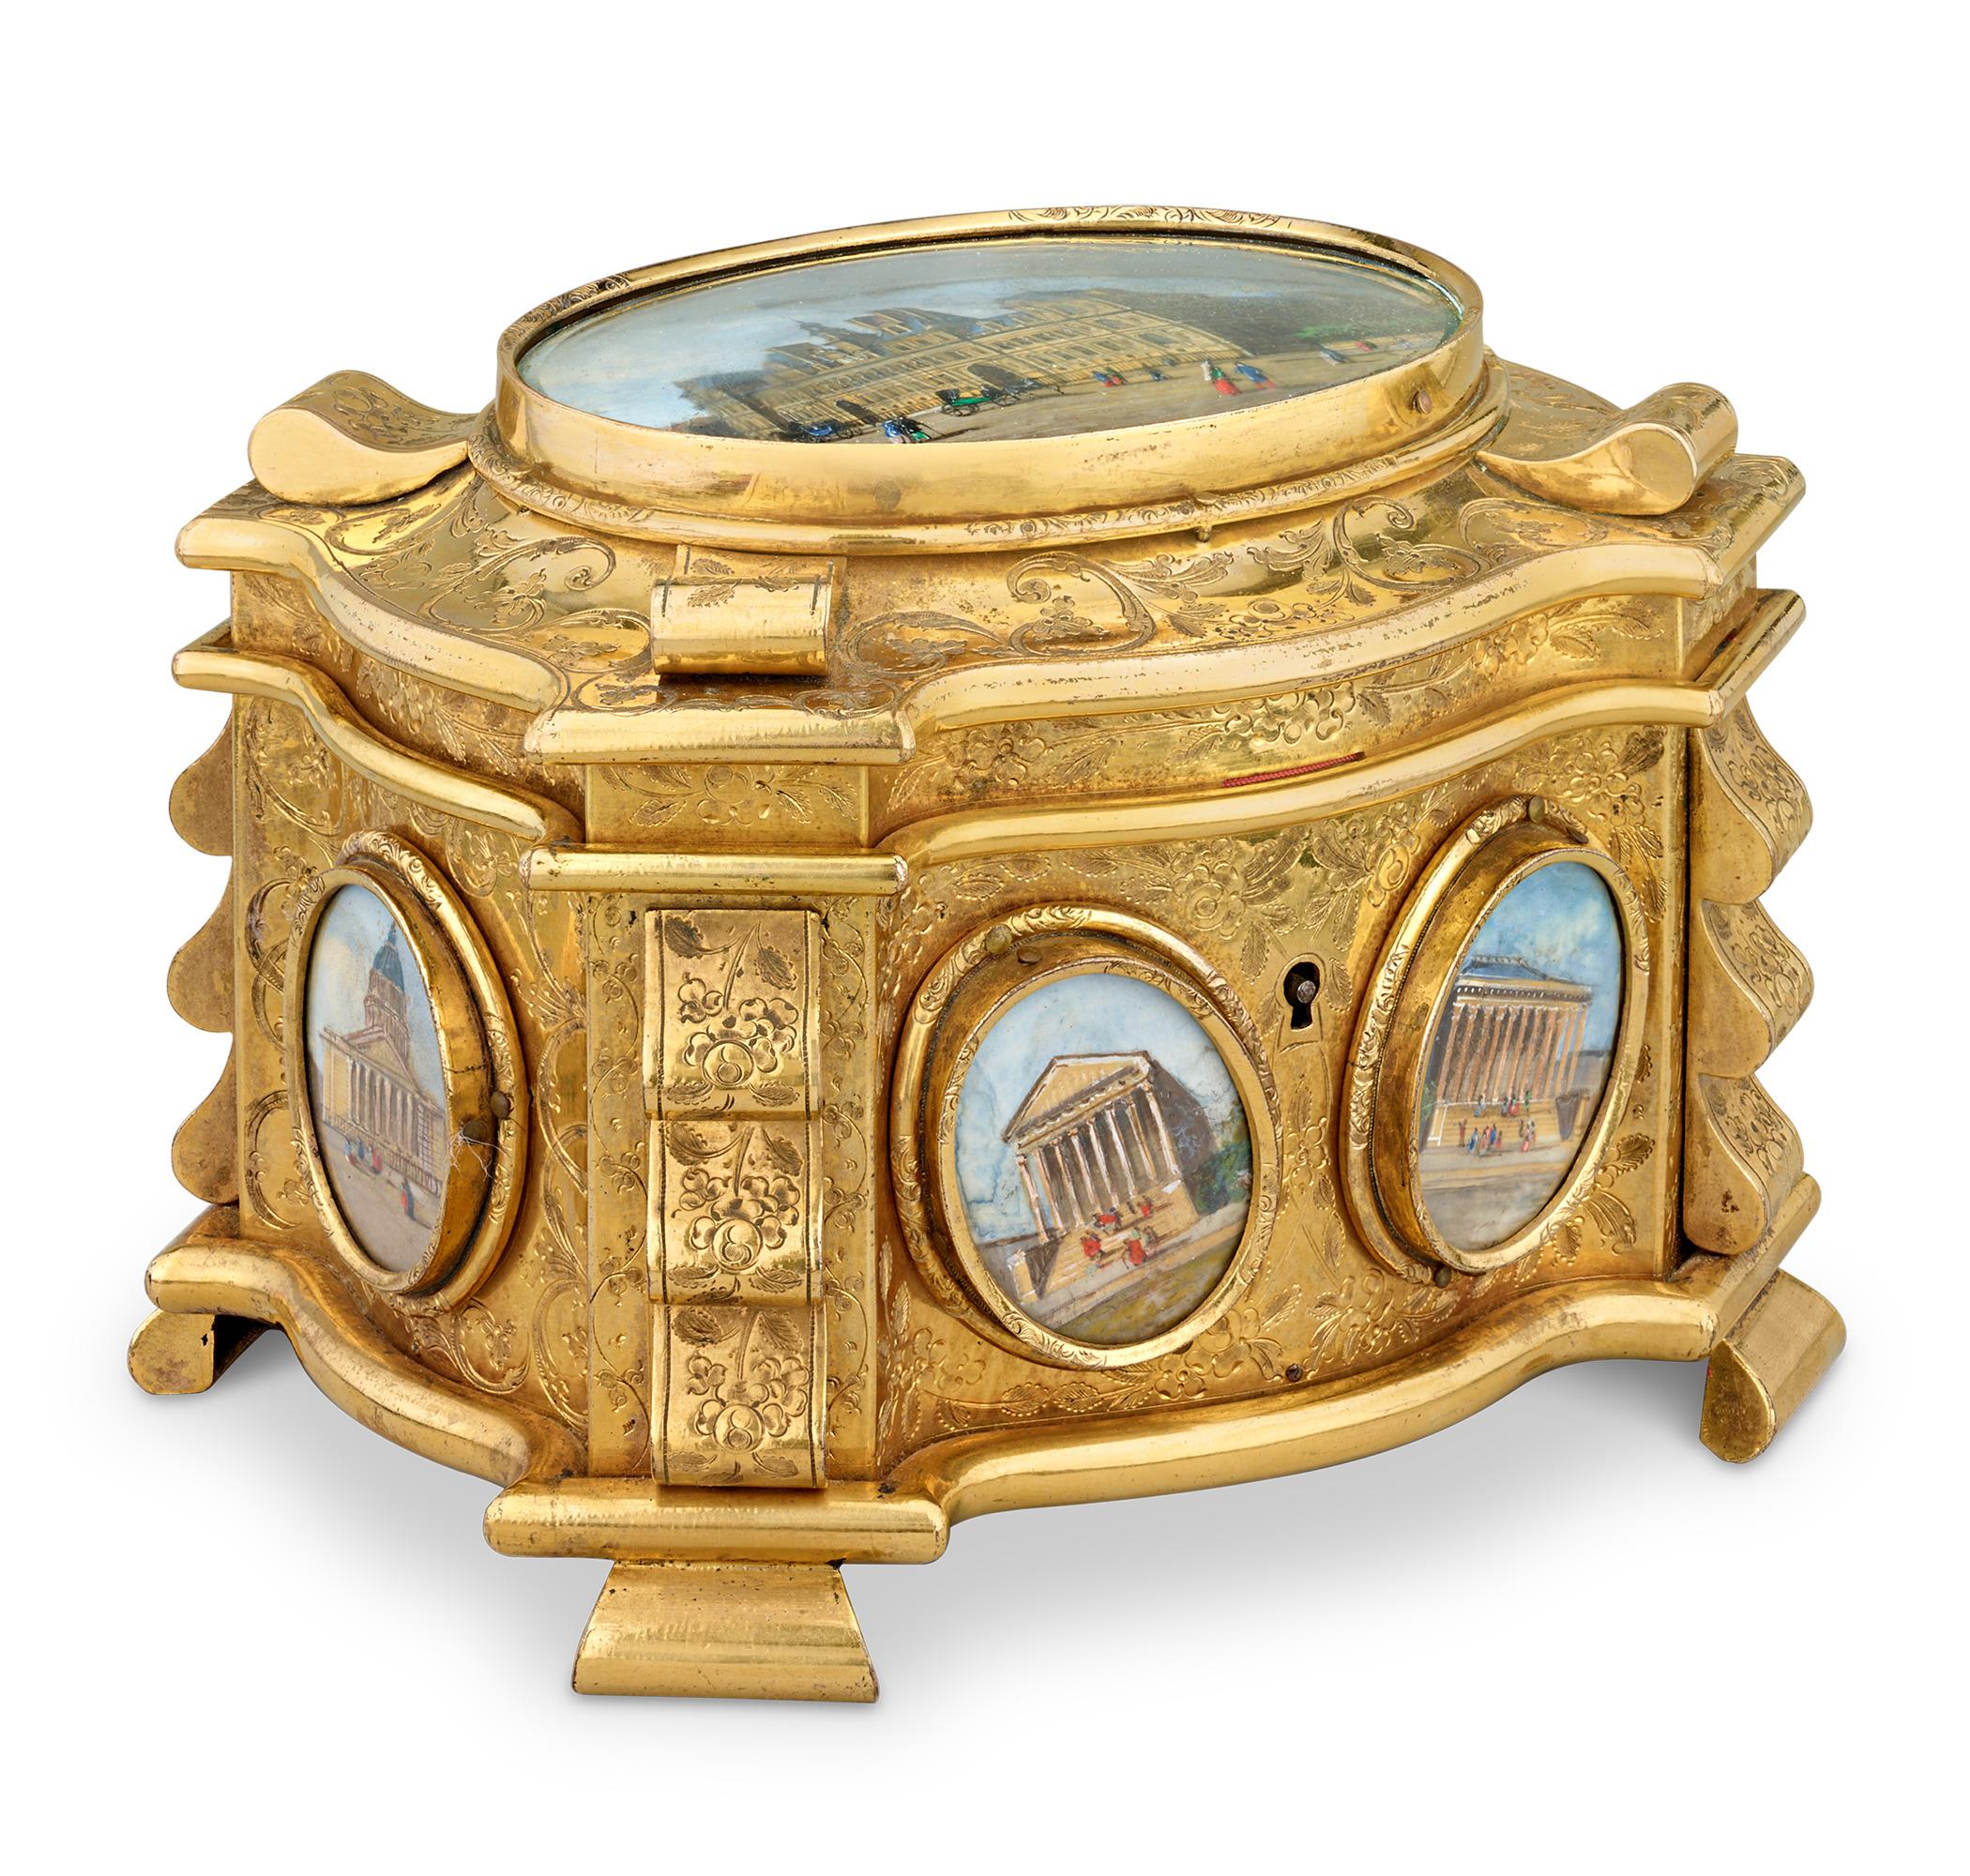 This serpentine-shaped engraved ormolu jewelry casket is an exquisite Napoleon III work of art. Reminiscent of works by Alphonse Giroux, a renowned purveyor of fine goods to the French aristocracy, this casket embodies the opulence and decorative